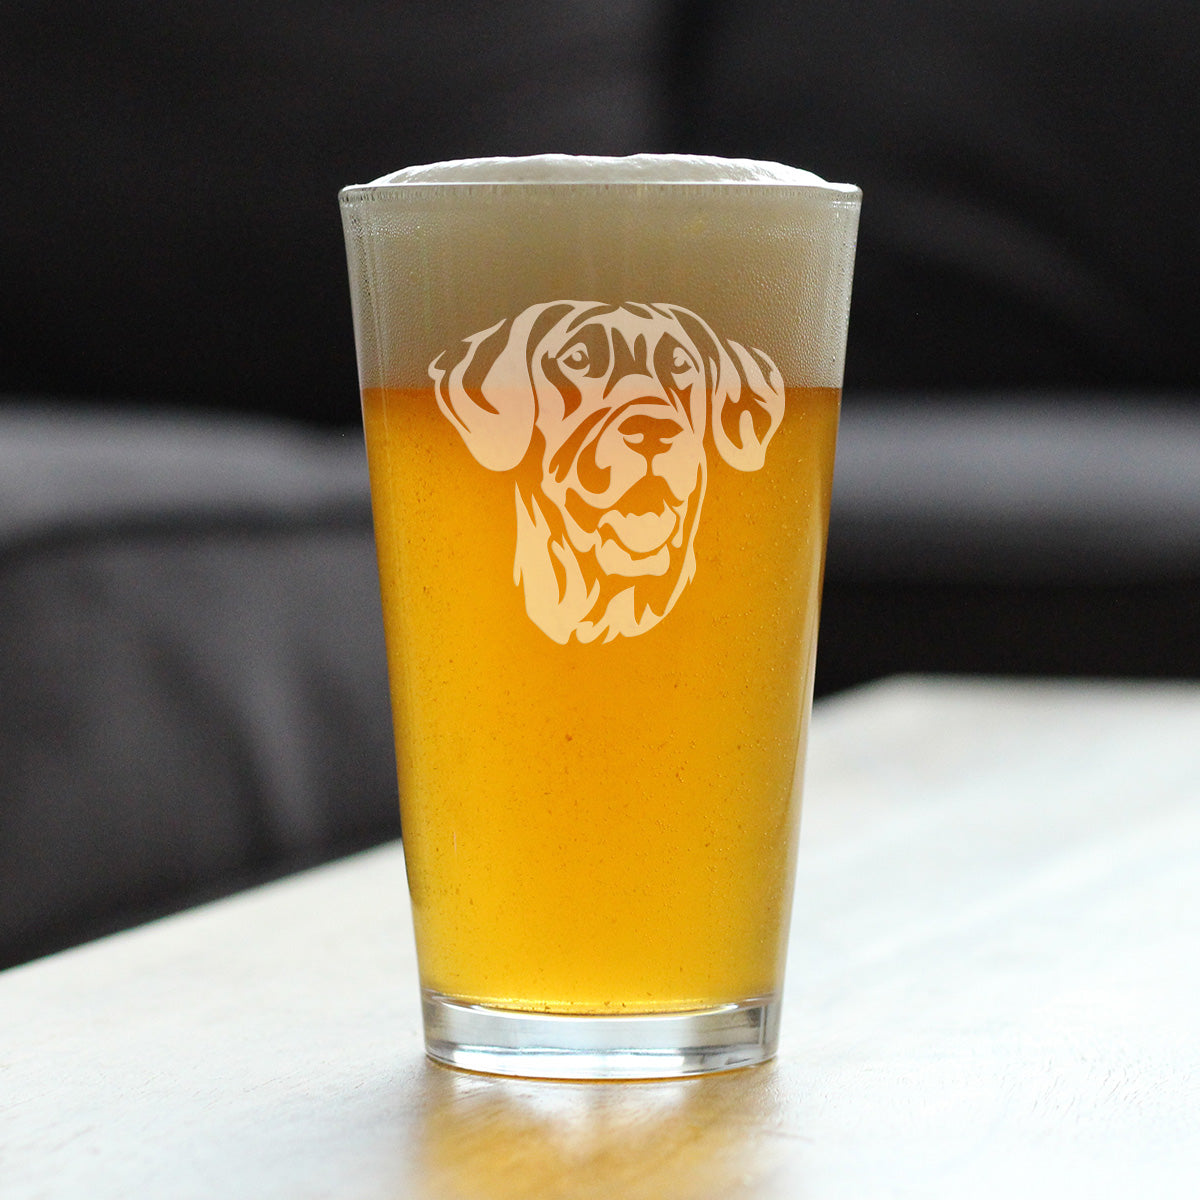 Great Dane Face Pint Glass for Beer - Unique Dog Themed Decor and Gifts for Moms &amp; Dads of Great Danes - 16 Oz